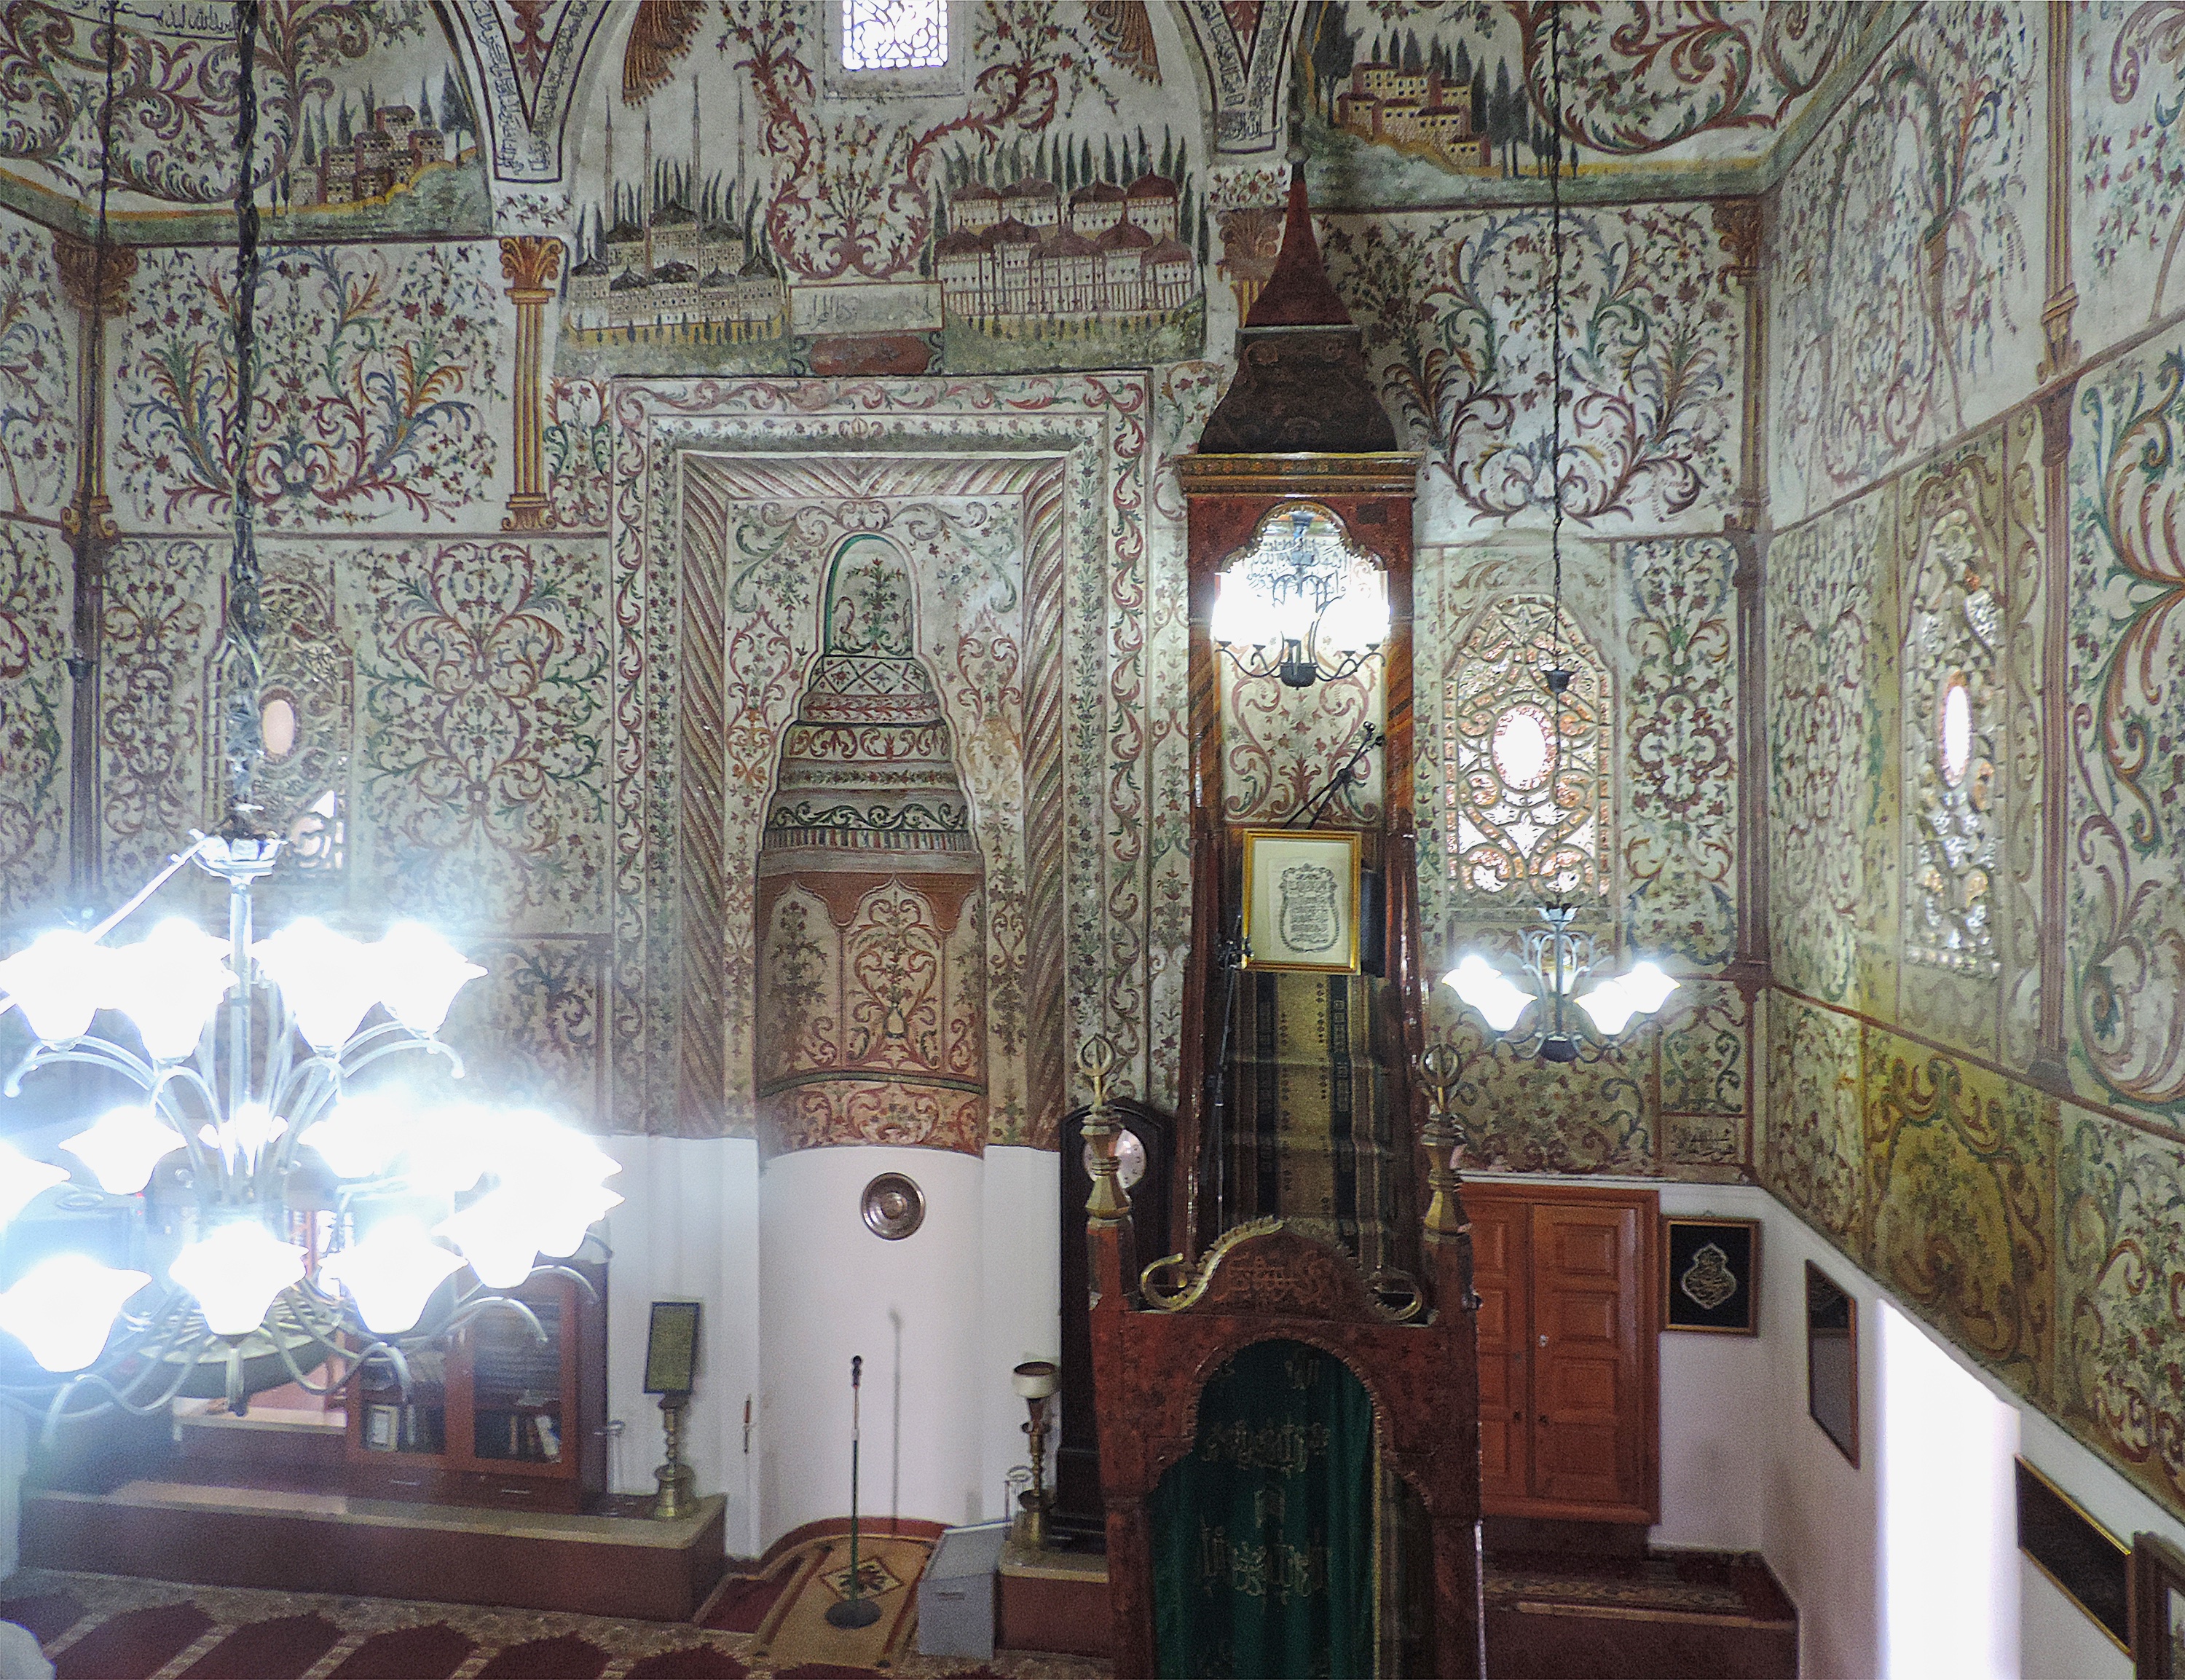 <p>The mosque prayer hall interior is decorated with painted panels of intricate plant motifs and architectural scenes, which cover the upper walls and domed ceiling, viewed here from the balcony. The mosque is designated a Cultural Monument of Albania.</p>